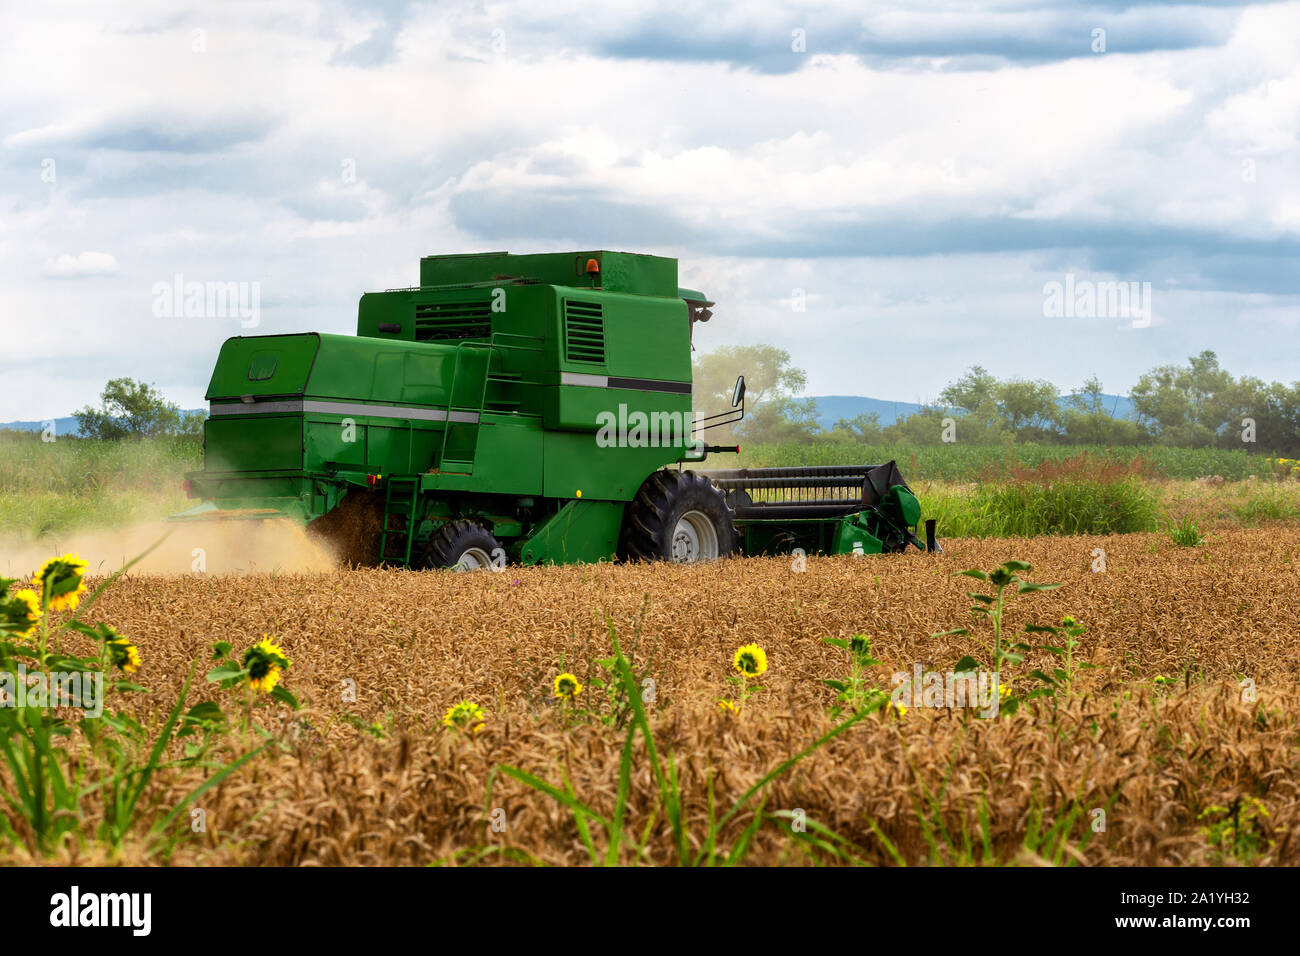 Combine harvester in action on wheat field. Harvesting is the process of gathering a ripe crop from the fields. Stock Photo